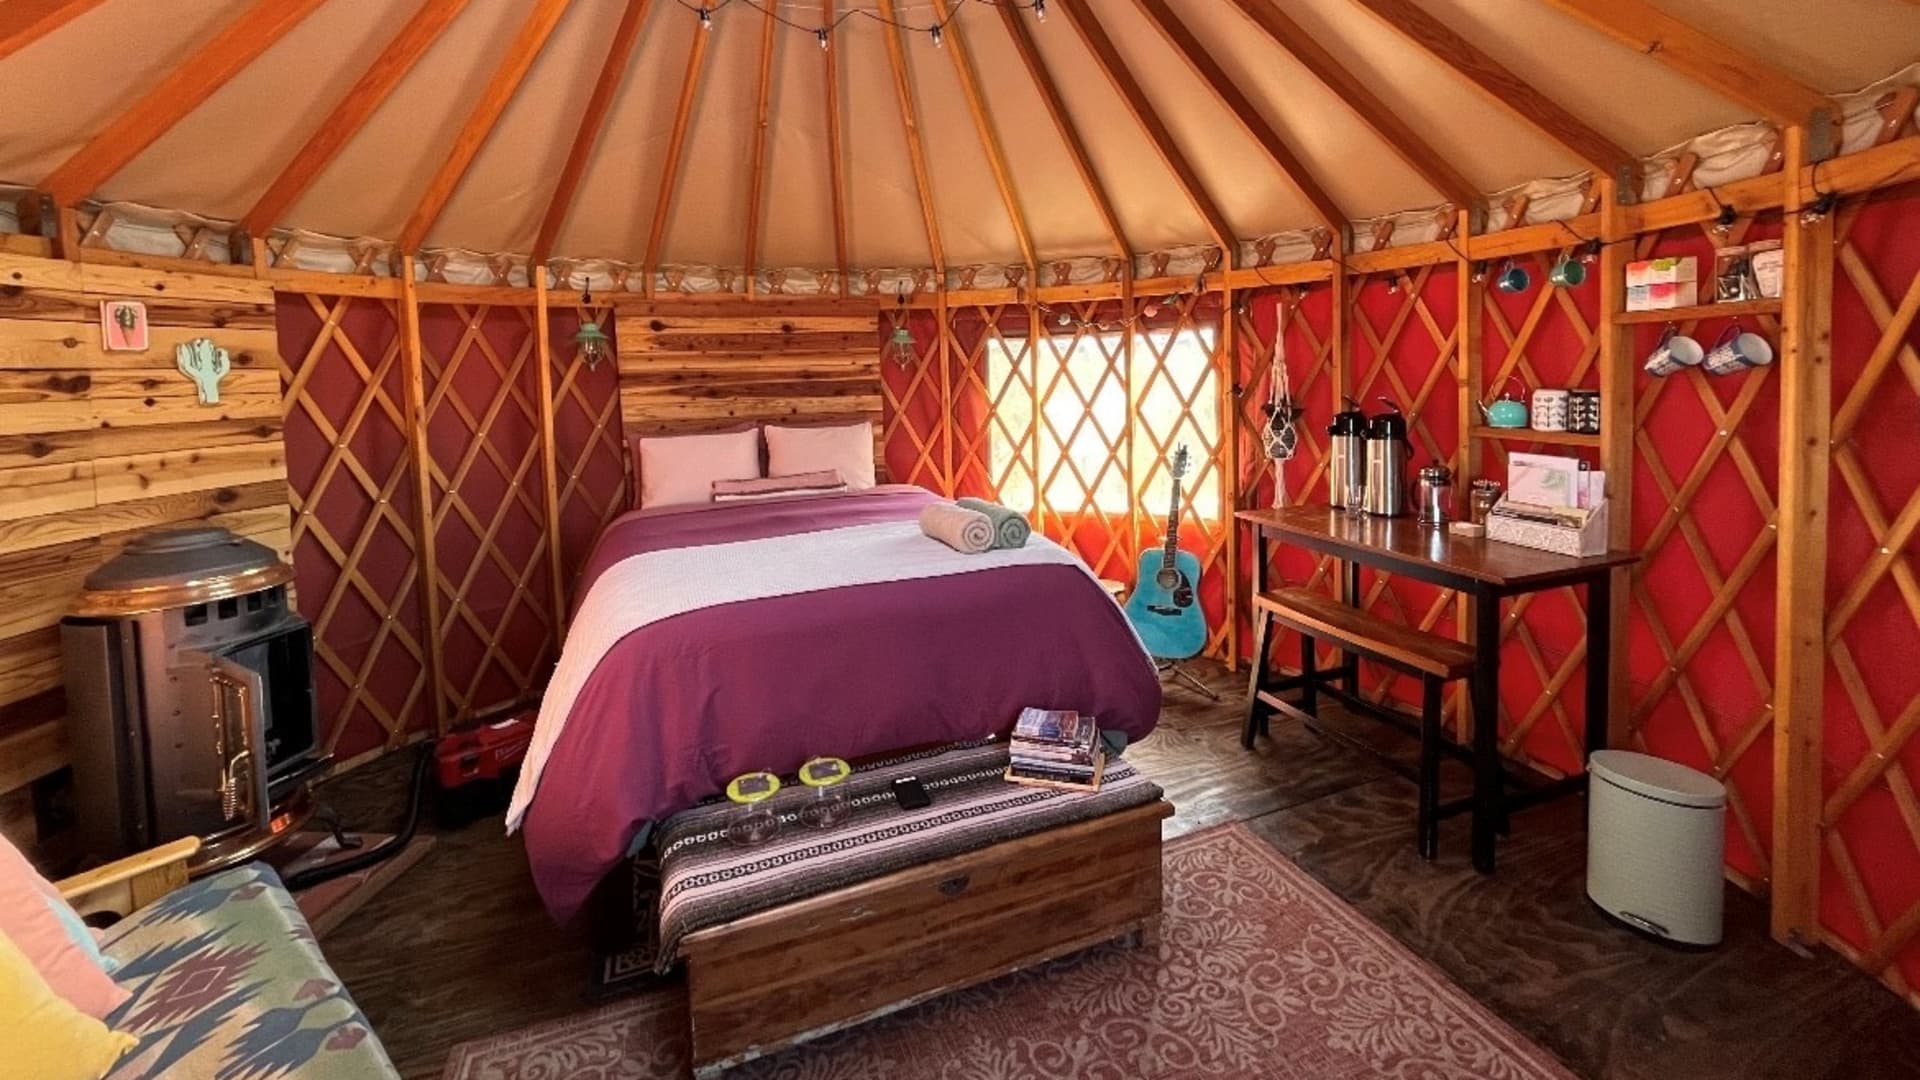 Herron's yurt currently costs $186 per night and can host up to four people. He says he primarily gets couples, millennials and older, who are looking for an off-the-grid-experience. 